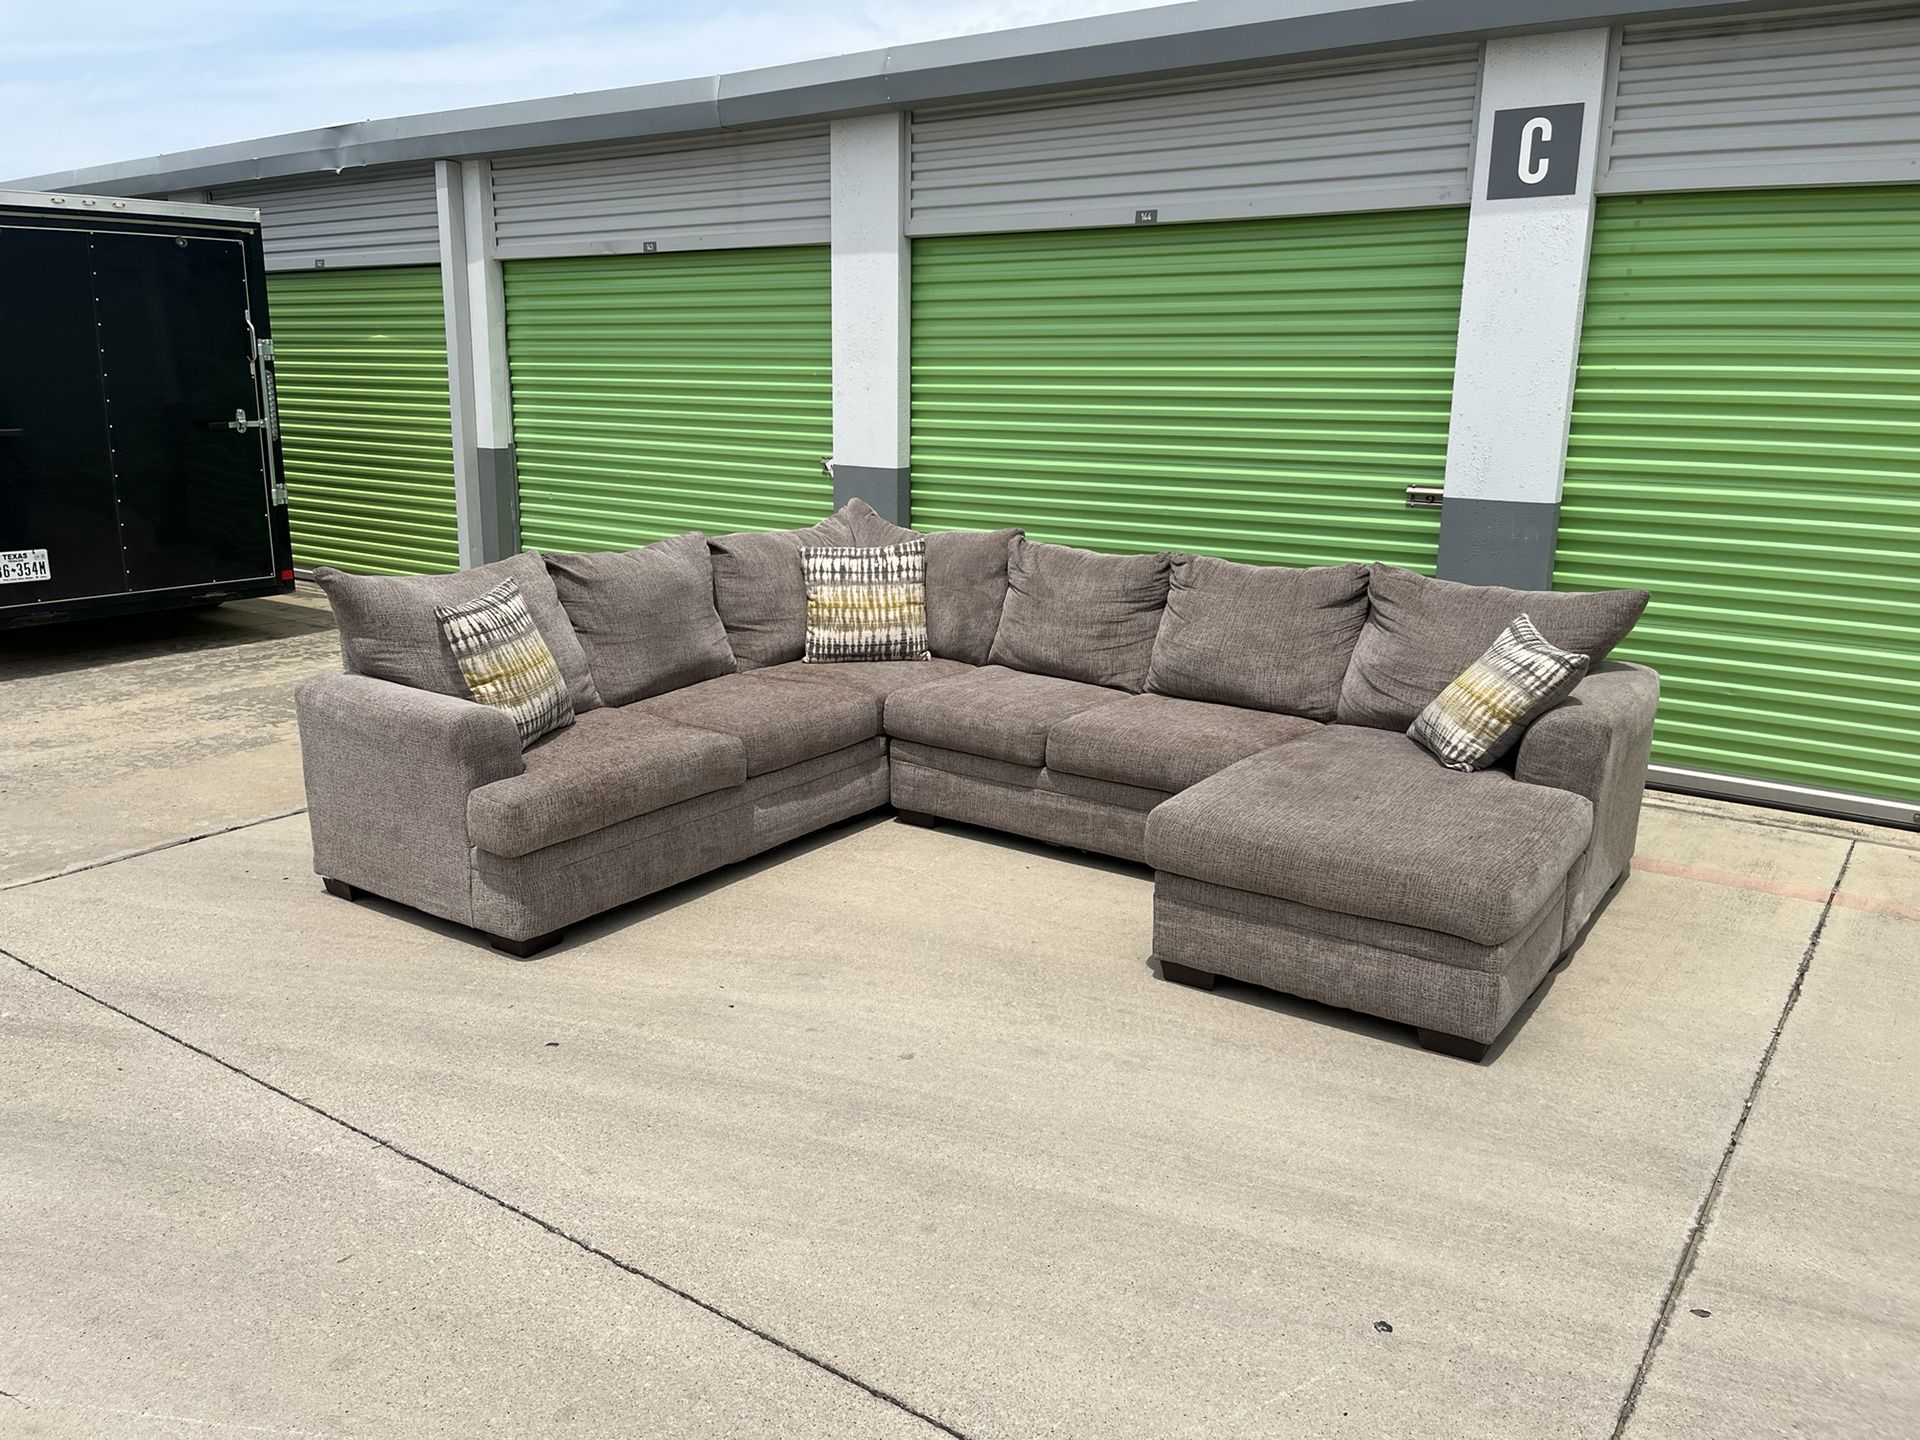 FREE DELIVERY - Large *Reversible* Sectional Couch